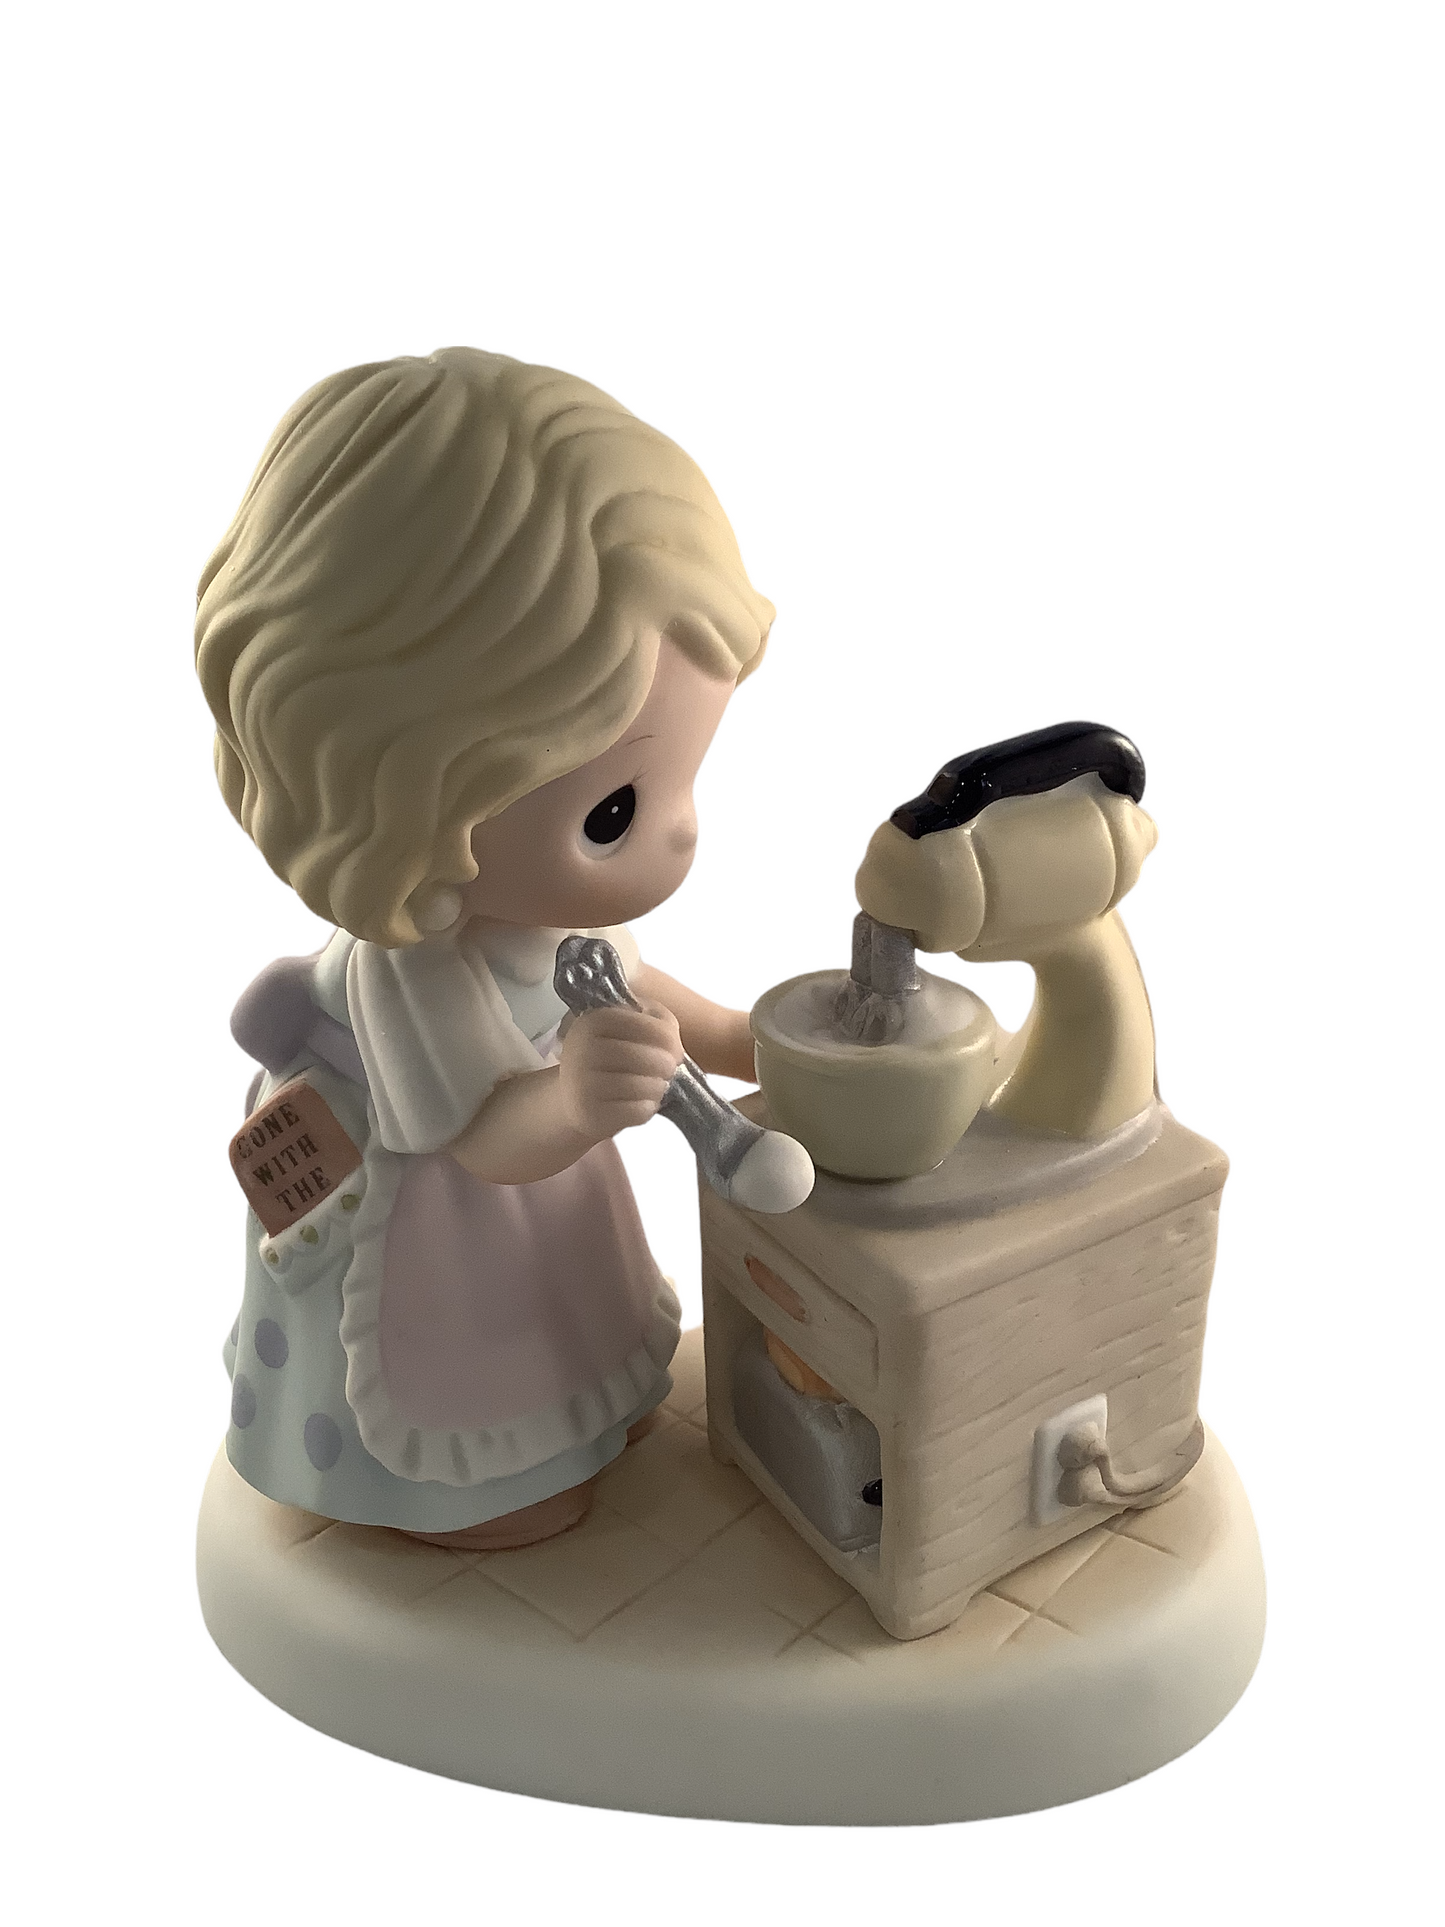 Mixing Up A Brighter Tomorrow - Precious Moment Figurine